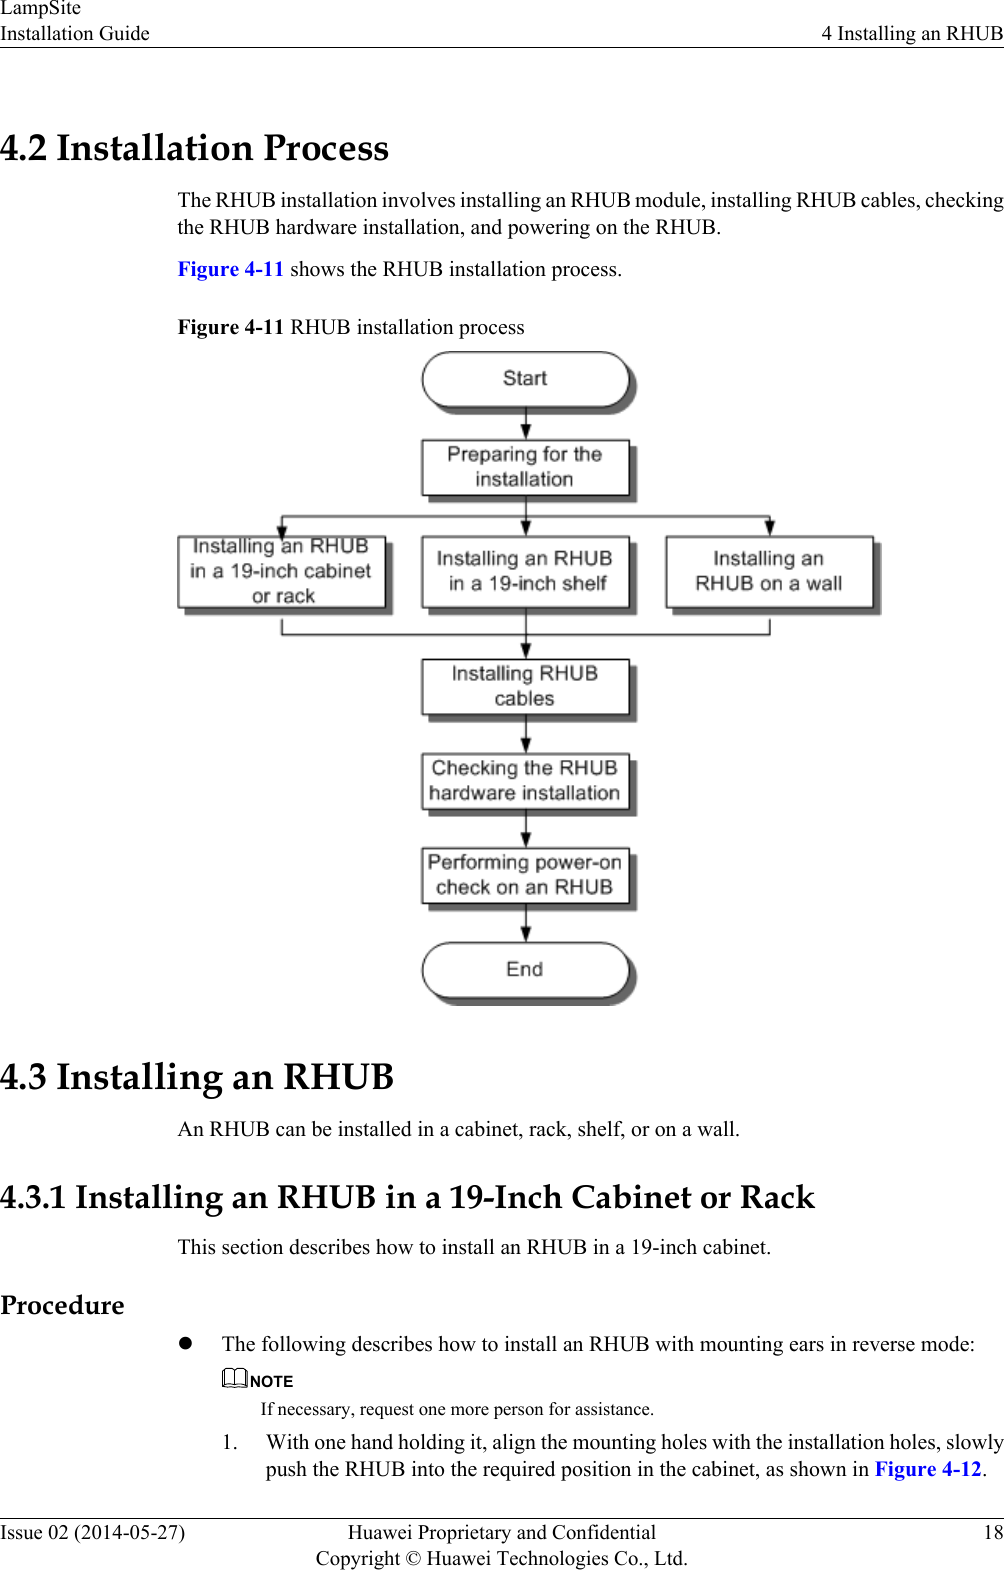 4.2 Installation ProcessThe RHUB installation involves installing an RHUB module, installing RHUB cables, checkingthe RHUB hardware installation, and powering on the RHUB.Figure 4-11 shows the RHUB installation process.Figure 4-11 RHUB installation process4.3 Installing an RHUBAn RHUB can be installed in a cabinet, rack, shelf, or on a wall.4.3.1 Installing an RHUB in a 19-Inch Cabinet or RackThis section describes how to install an RHUB in a 19-inch cabinet.ProcedurelThe following describes how to install an RHUB with mounting ears in reverse mode:NOTEIf necessary, request one more person for assistance.1. With one hand holding it, align the mounting holes with the installation holes, slowlypush the RHUB into the required position in the cabinet, as shown in Figure 4-12.LampSiteInstallation Guide 4 Installing an RHUBIssue 02 (2014-05-27) Huawei Proprietary and ConfidentialCopyright © Huawei Technologies Co., Ltd.18